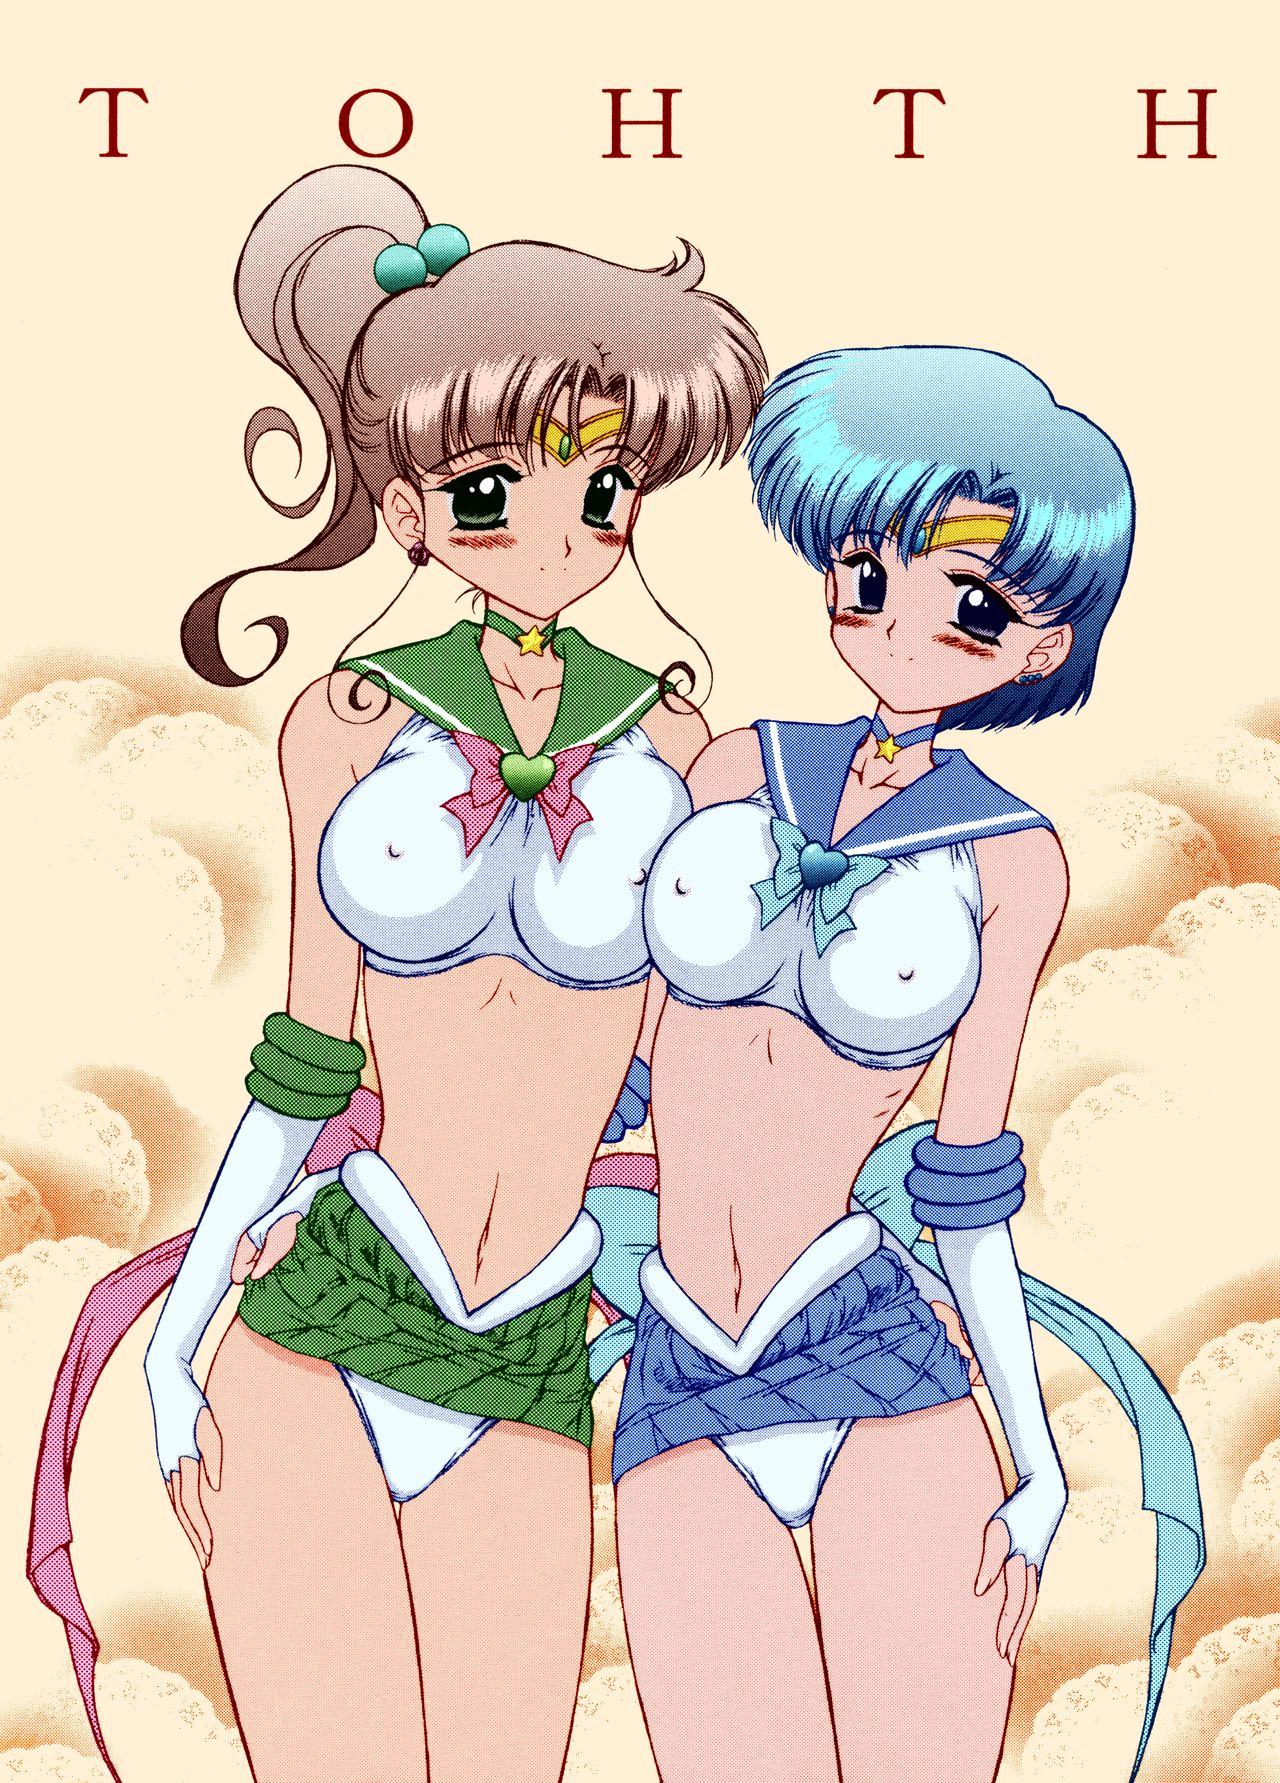 Gay Trimmed Tohth - Sailor moon Virgin - Picture 1